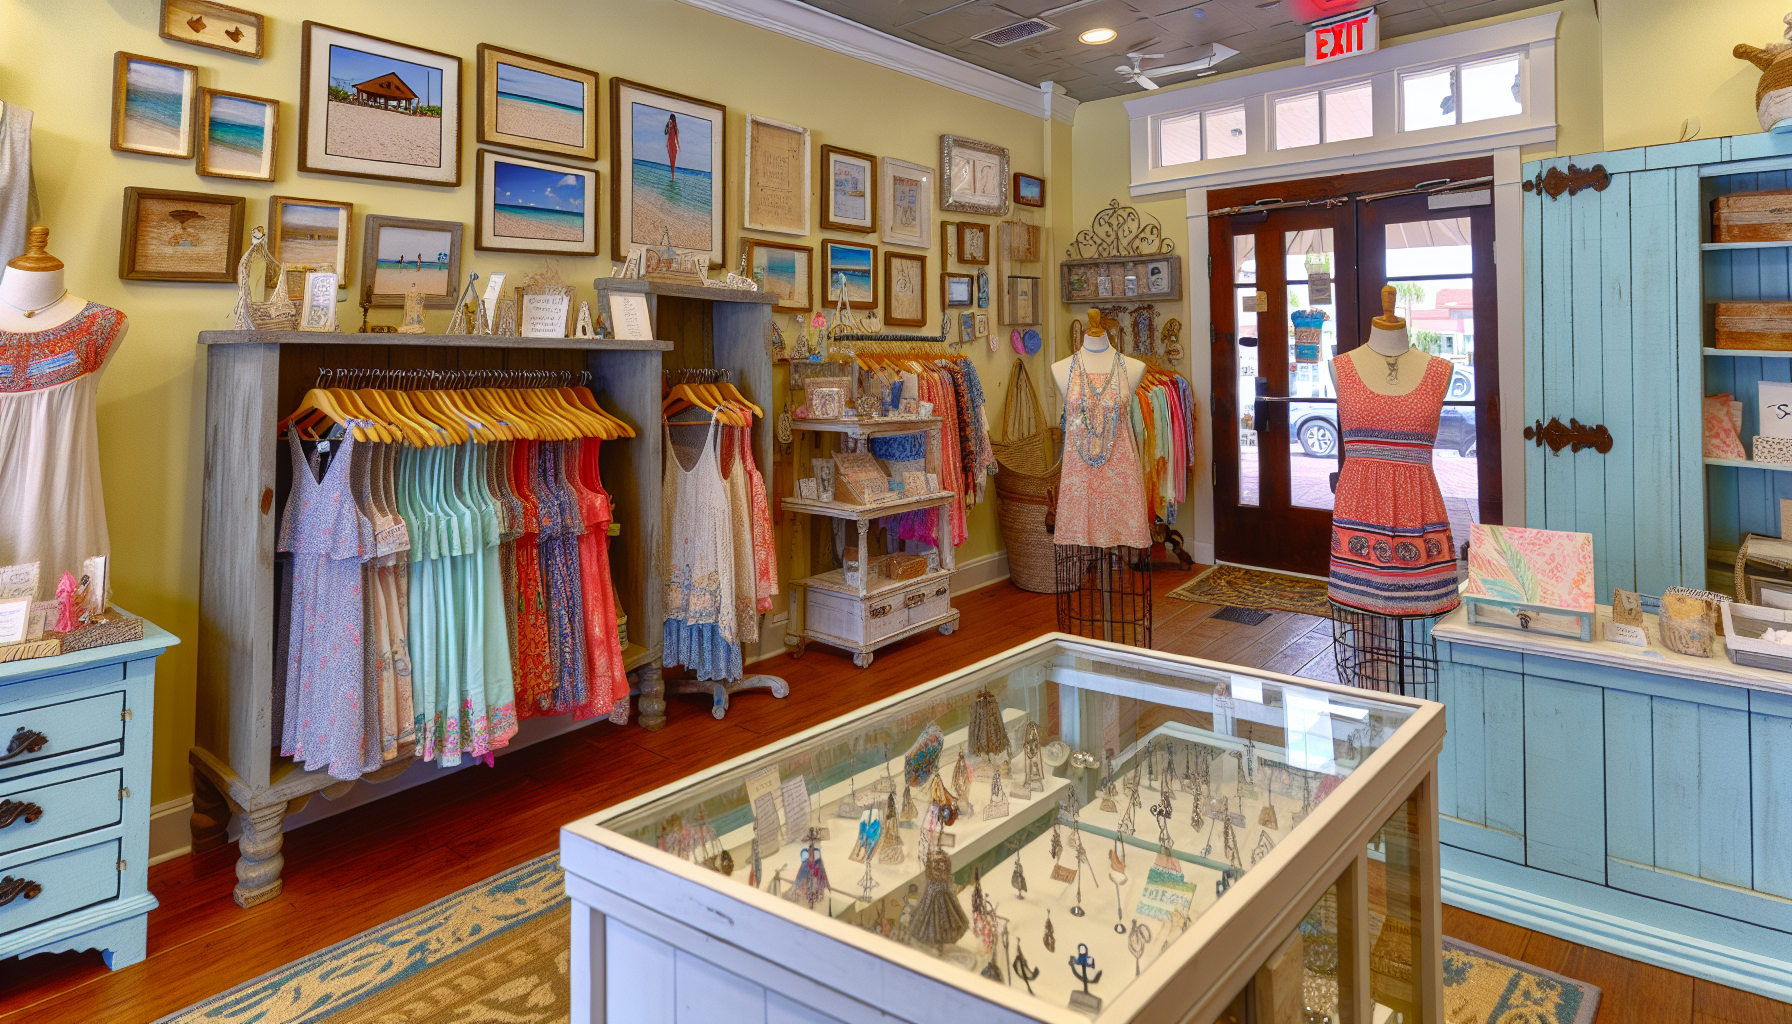 Local boutique with beach-themed clothing and accessories in Navarre